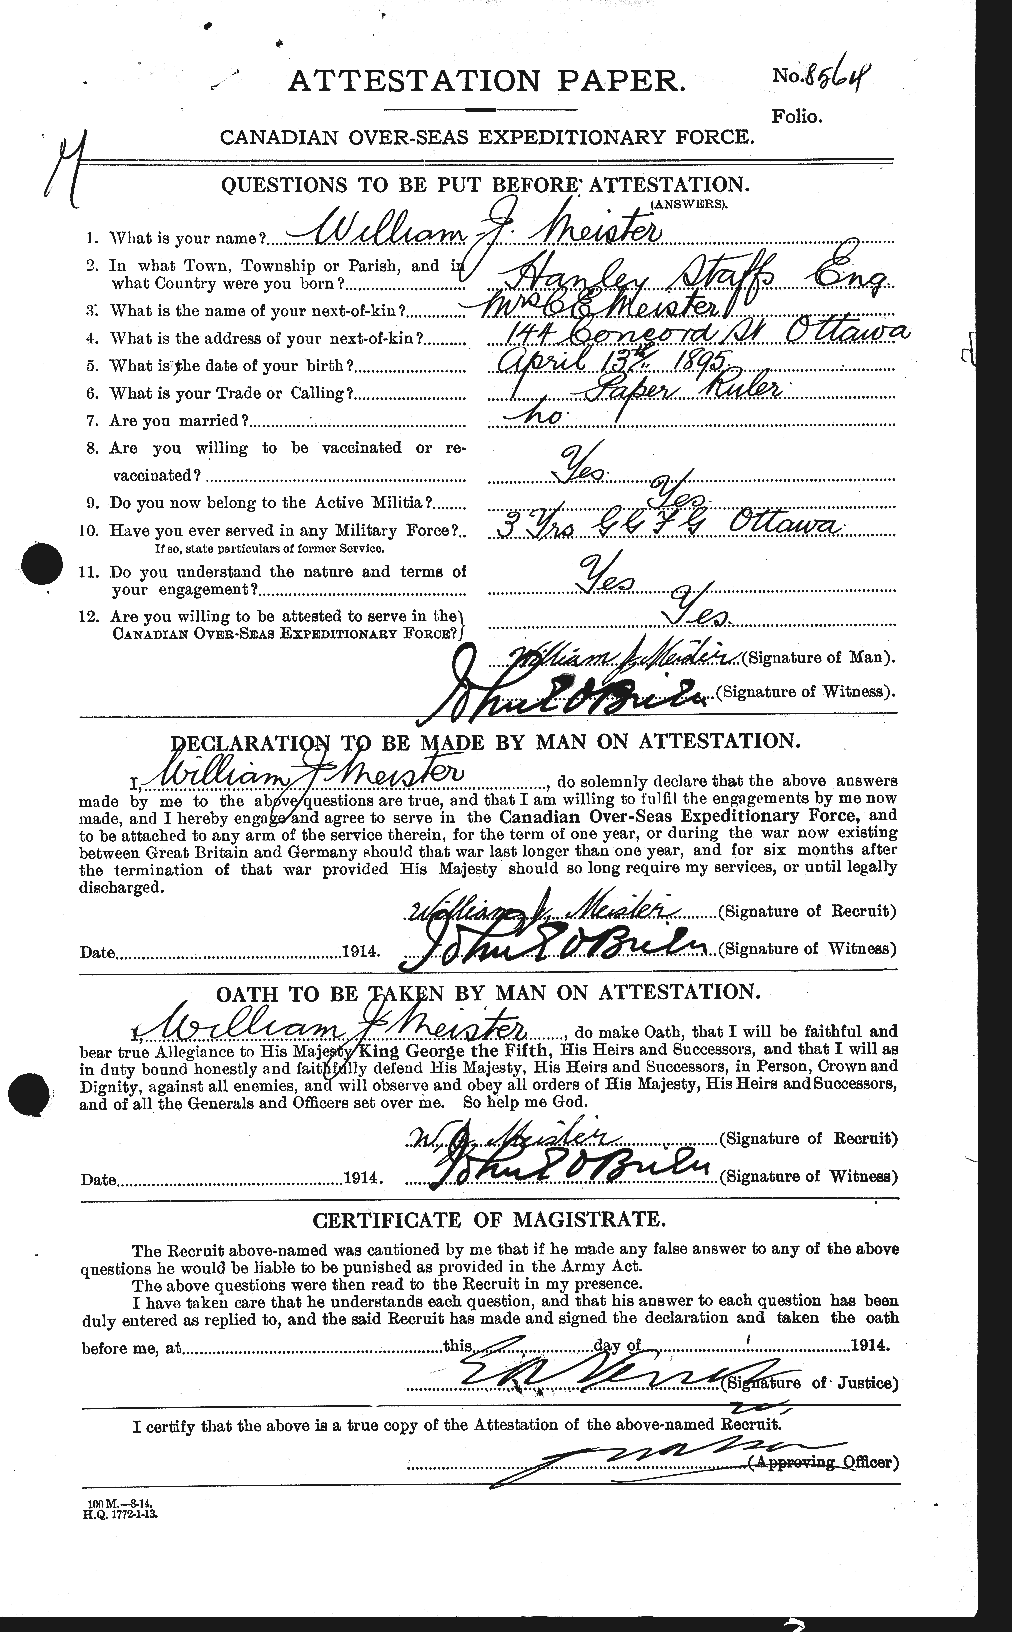 Personnel Records of the First World War - CEF 492004a